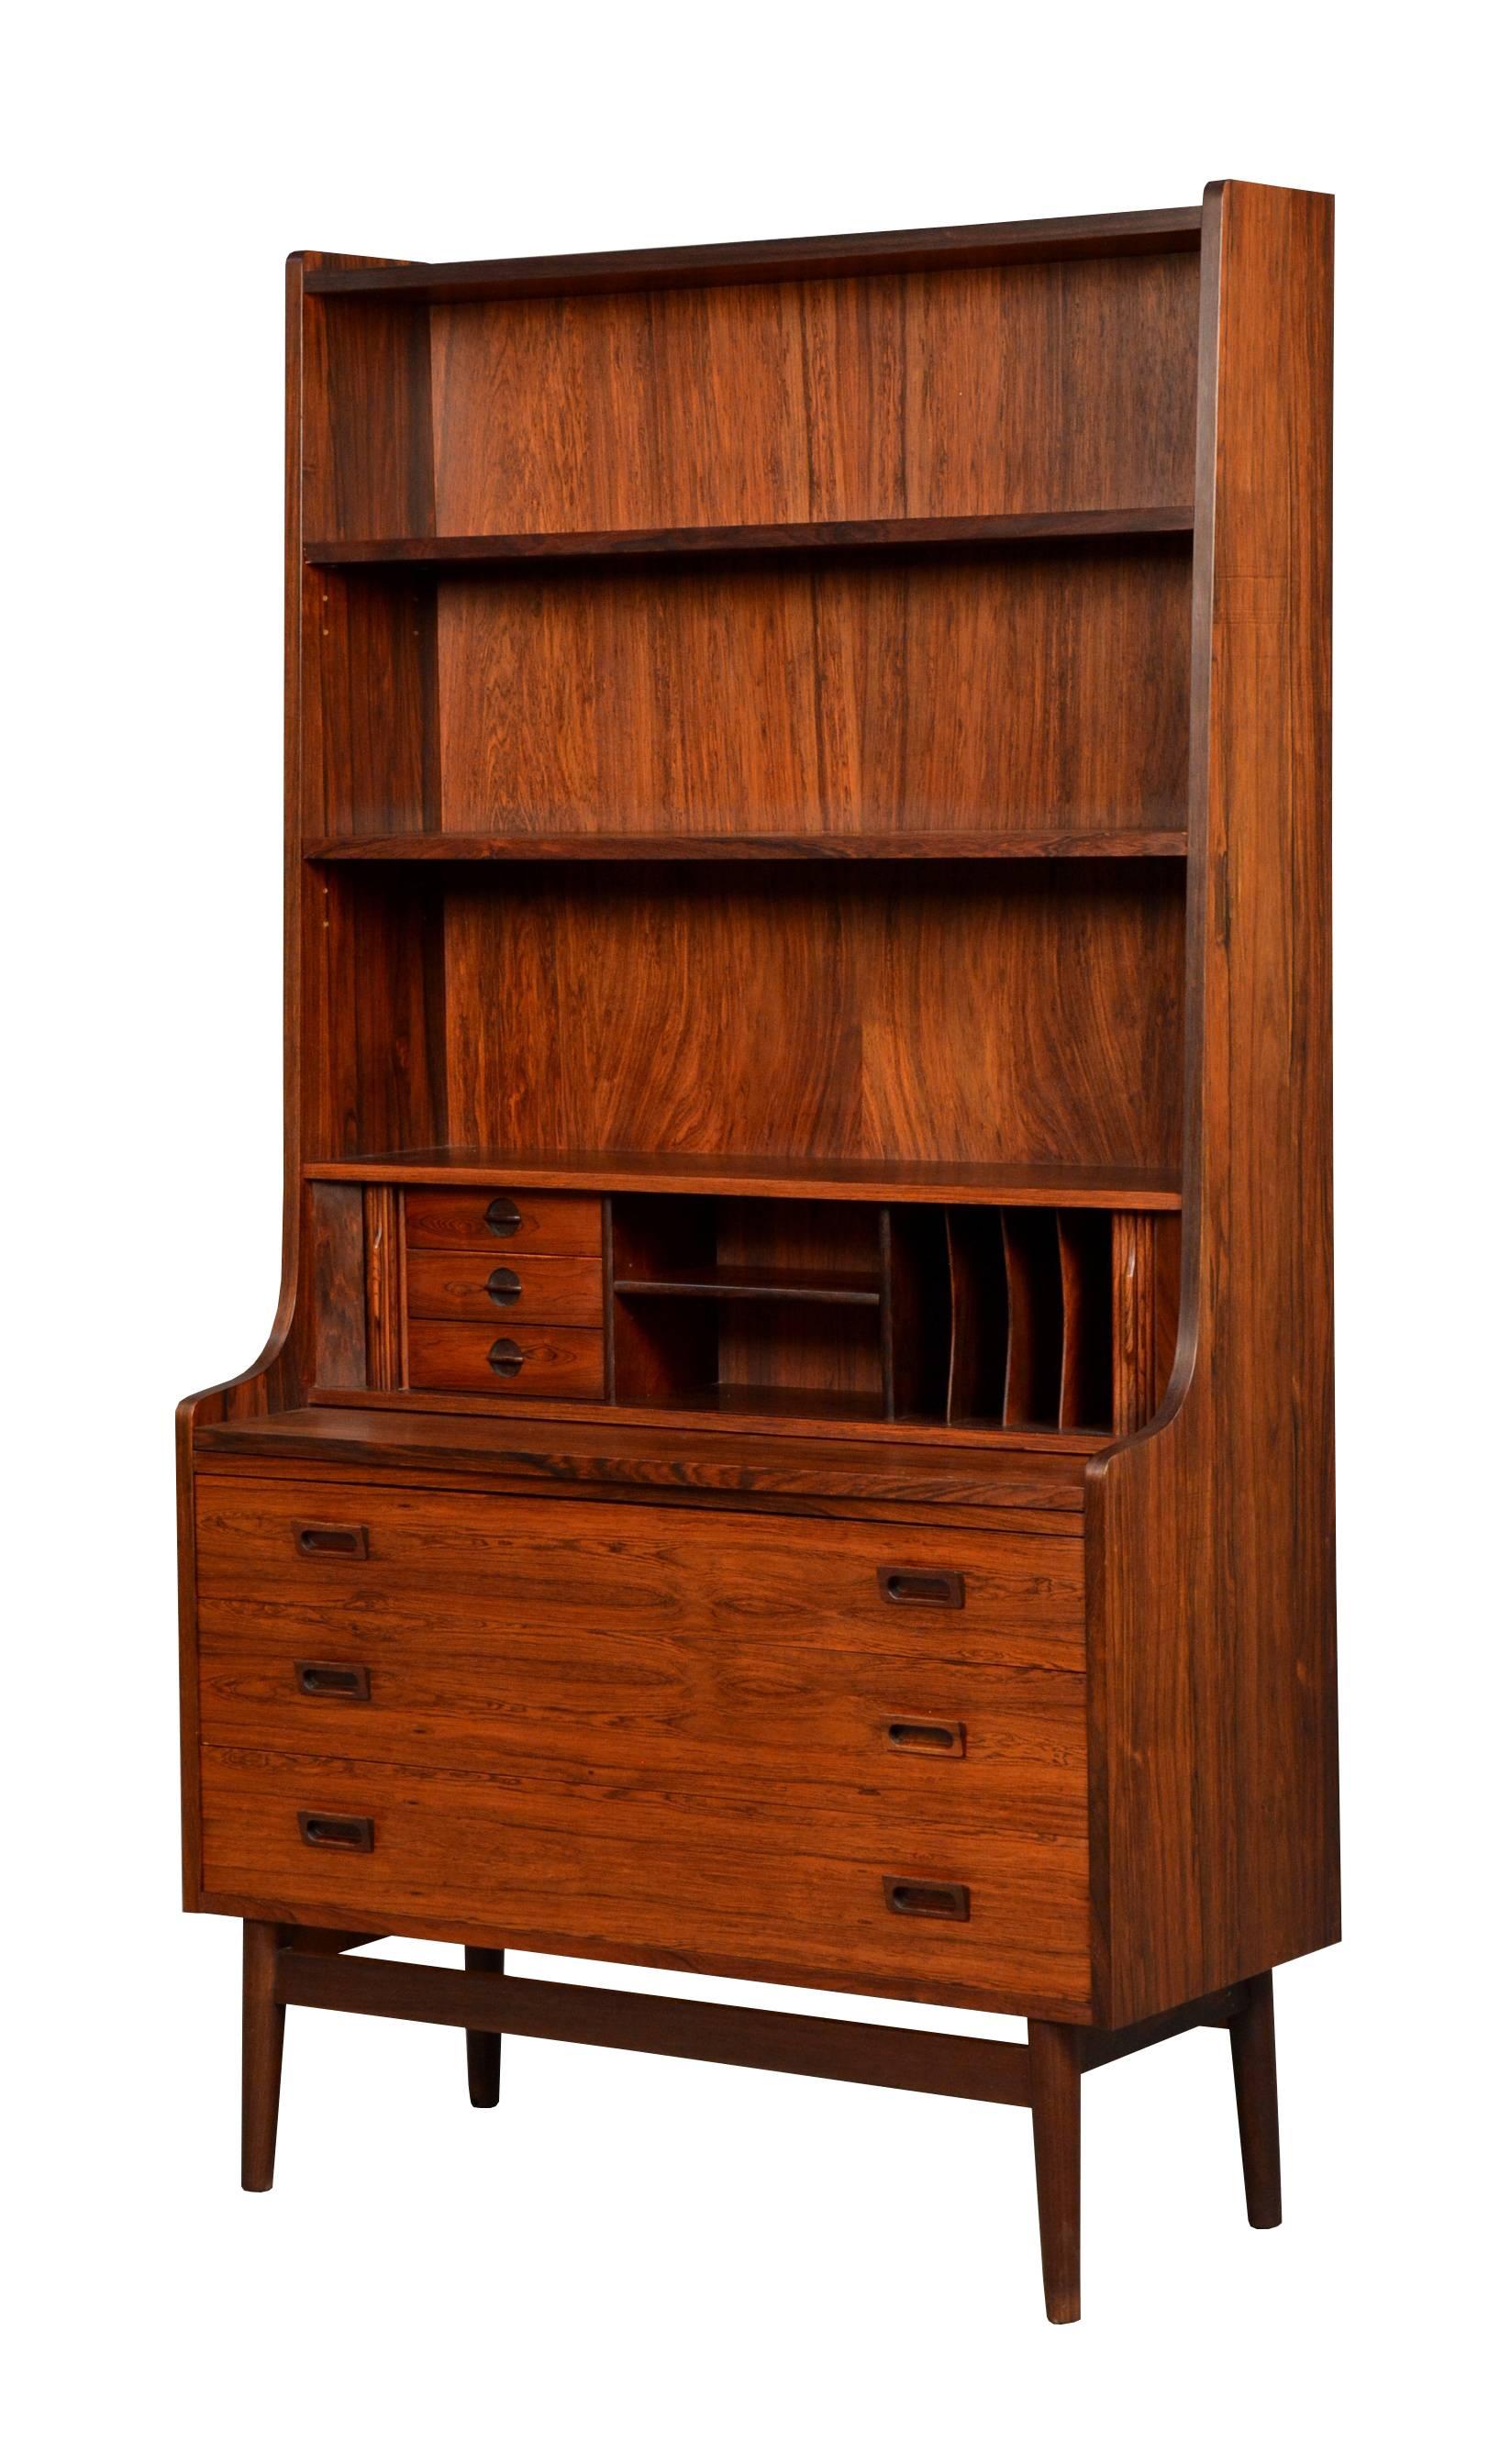 Shelving cabinet by Nexo Furniture, produced by Nexo Møbelfabrik, Denmark, 1960s. In rosewood, with three front and two top adjustable shelves. Overall in good vintage condition.